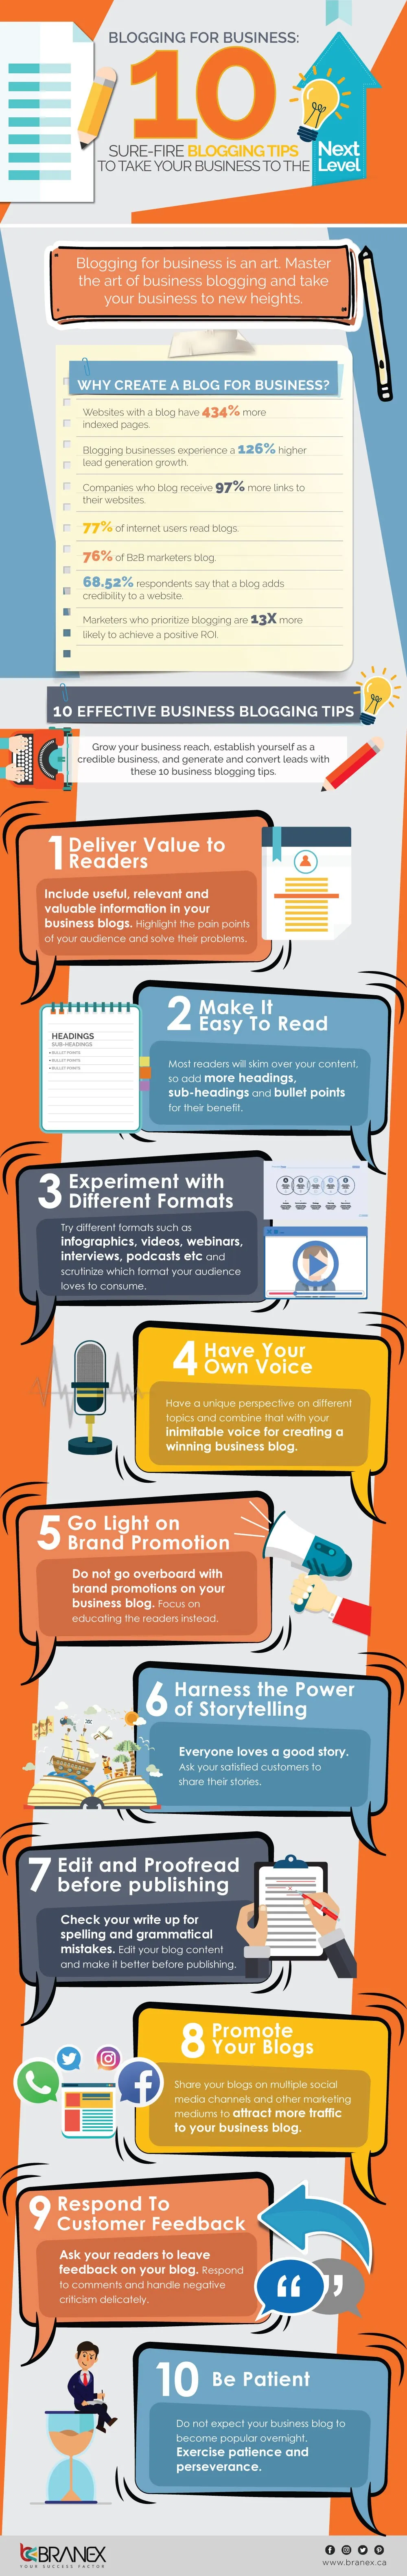 Blogging For Business: 10 Sure-Fire Blogging Tips To Take Your Business To The Next Level - #infographic